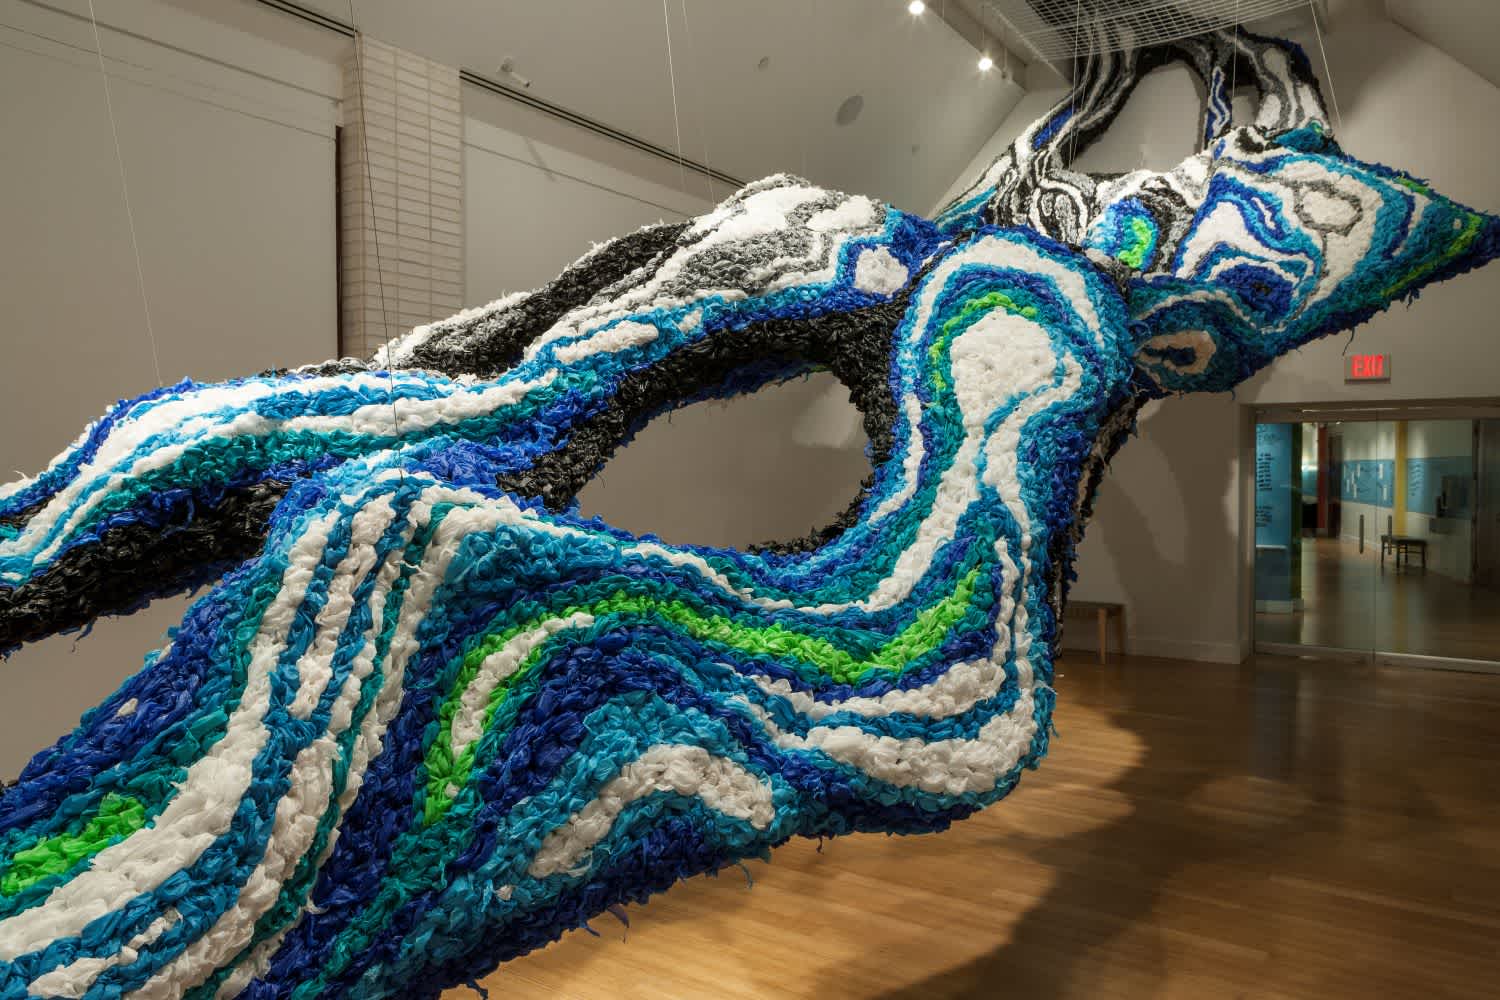 “Alluvion,” a large-scale art installation created by artist Crystal Wagner for her exhibition Surface Tension at Virginia MOCA. She put together her awe-inspiring piece over the course of two weeks, using material like party table cloth and chicken wire.